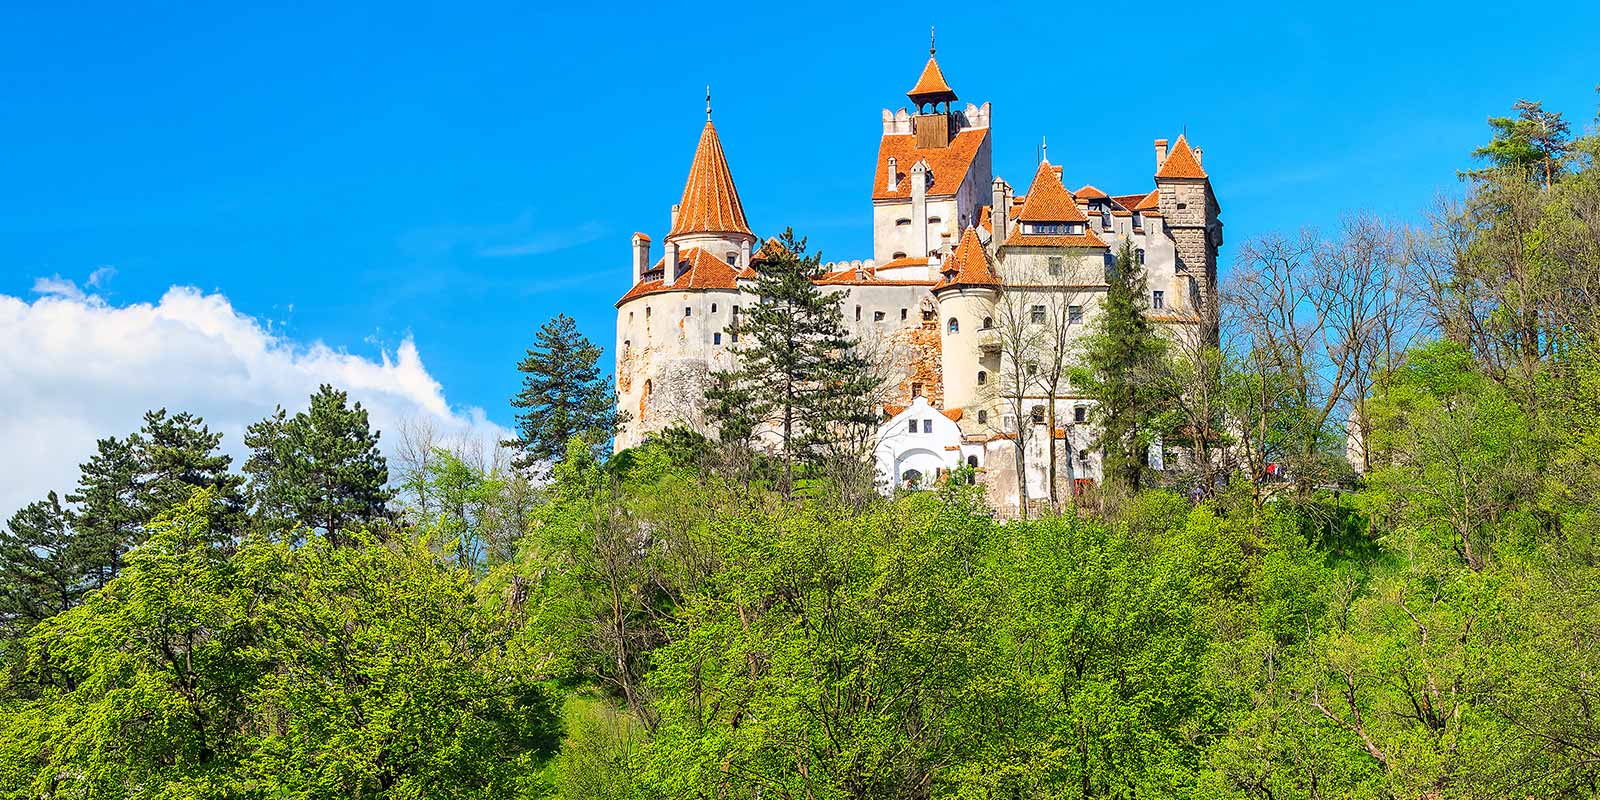 Bran Castle perched atop a hill in the spring